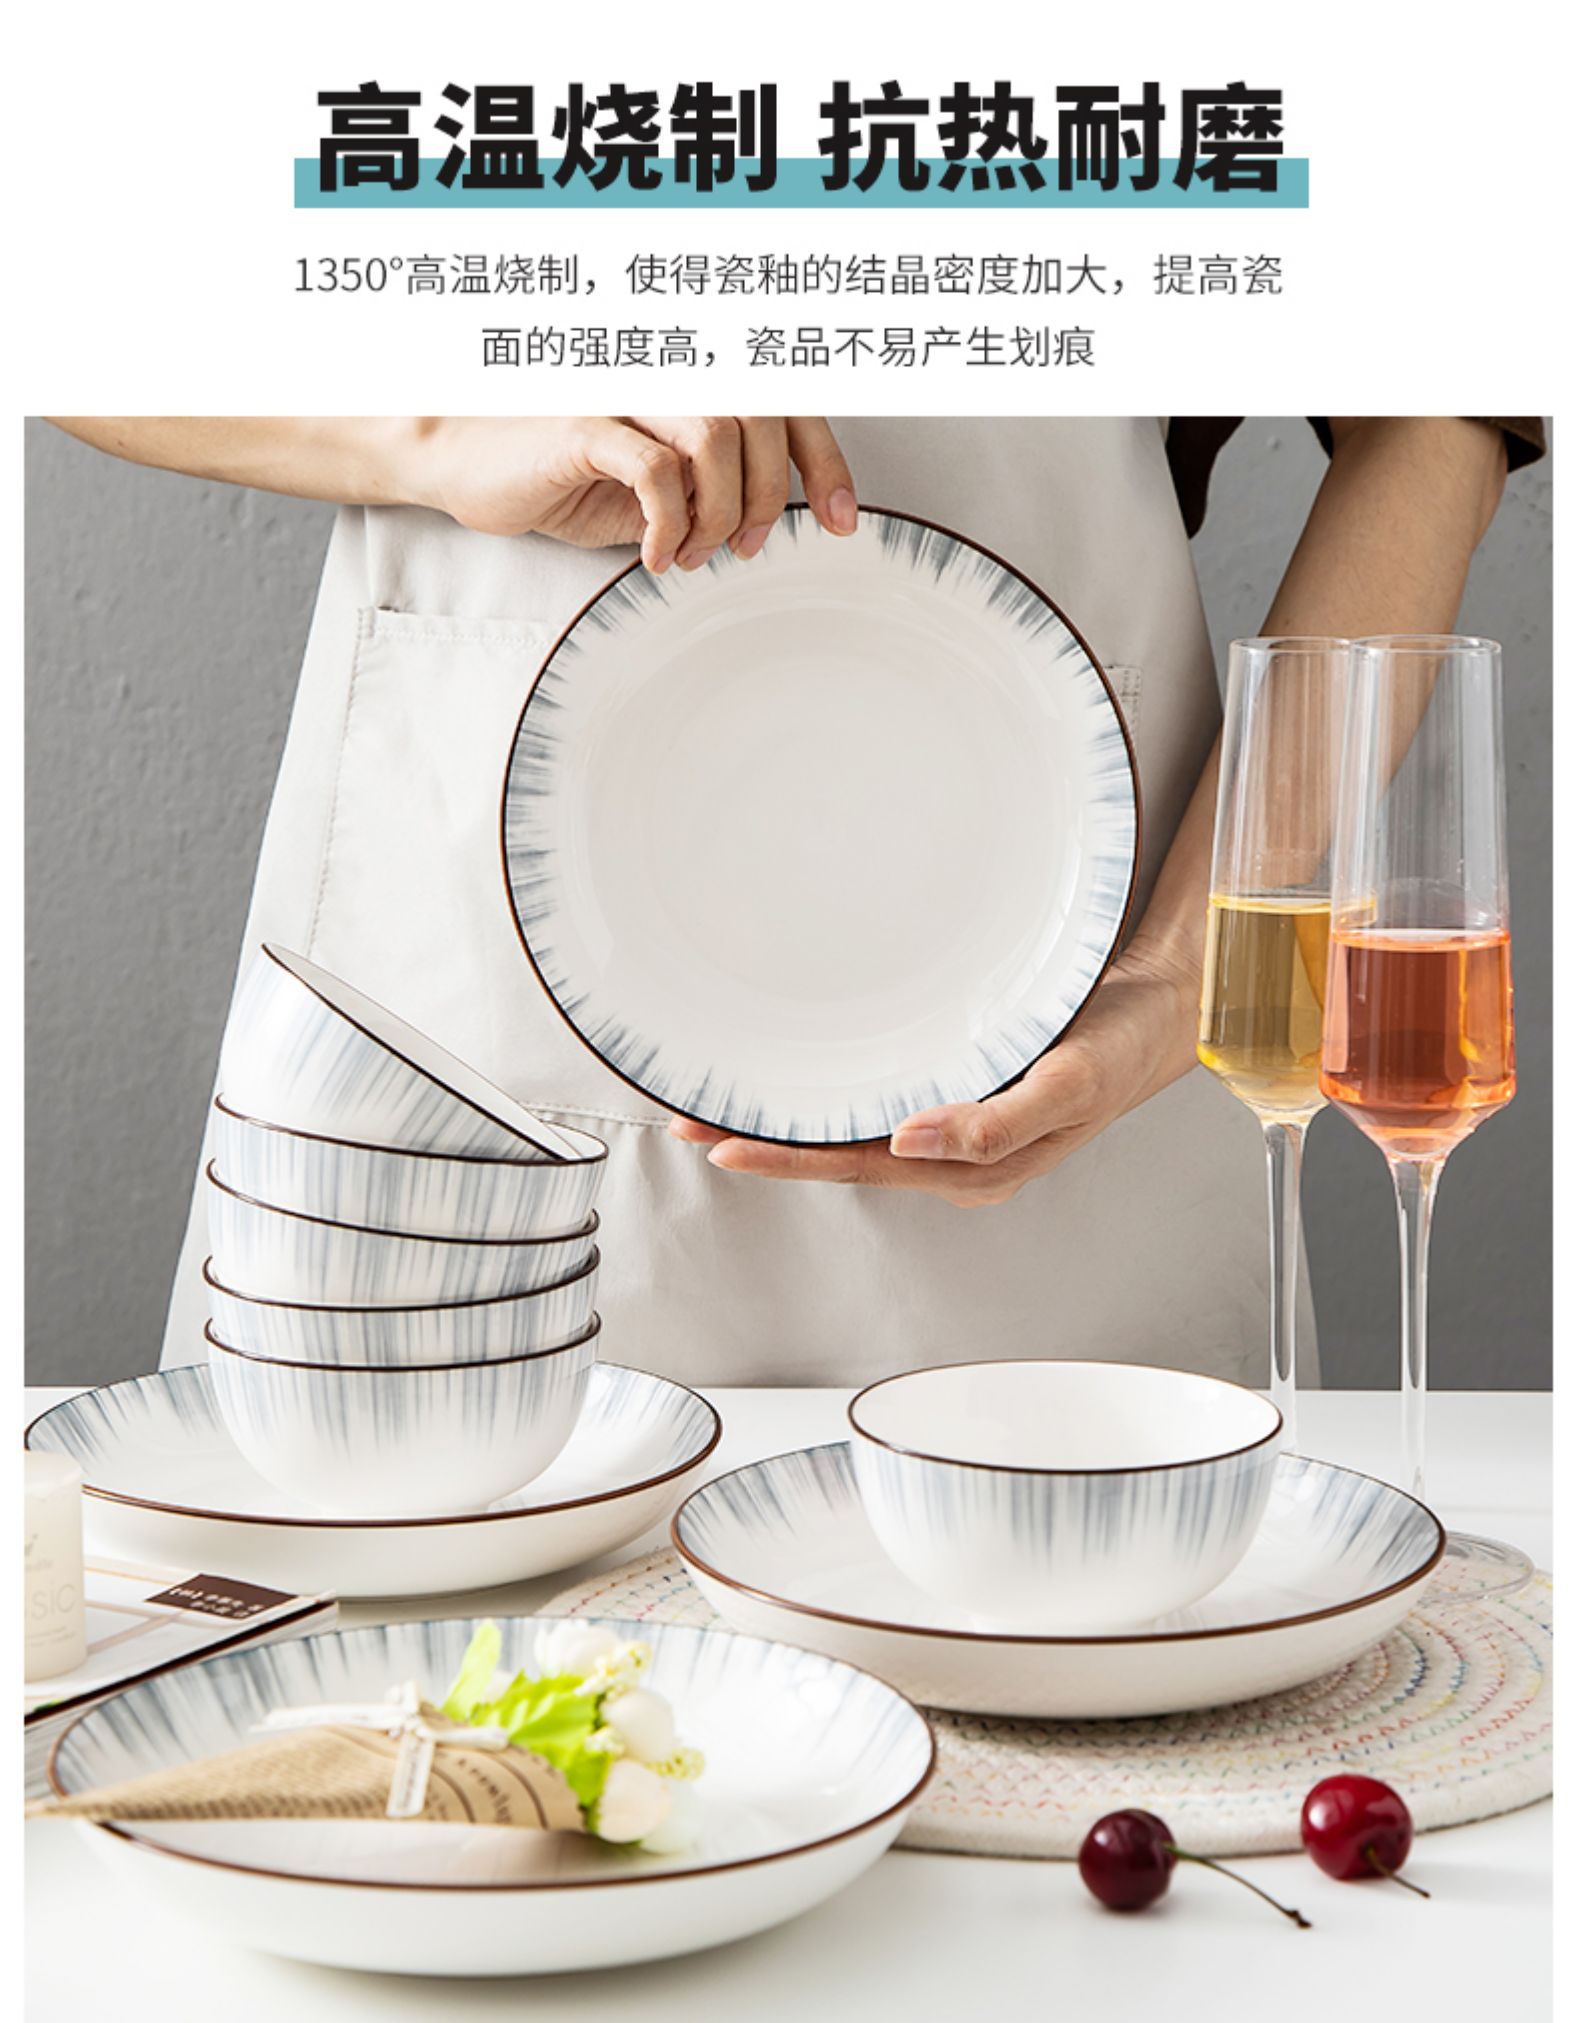 Contracted rice bowls home dishes suit Nordic style tableware creative soup bowl rainbow such use ceramic bowl dish suits for